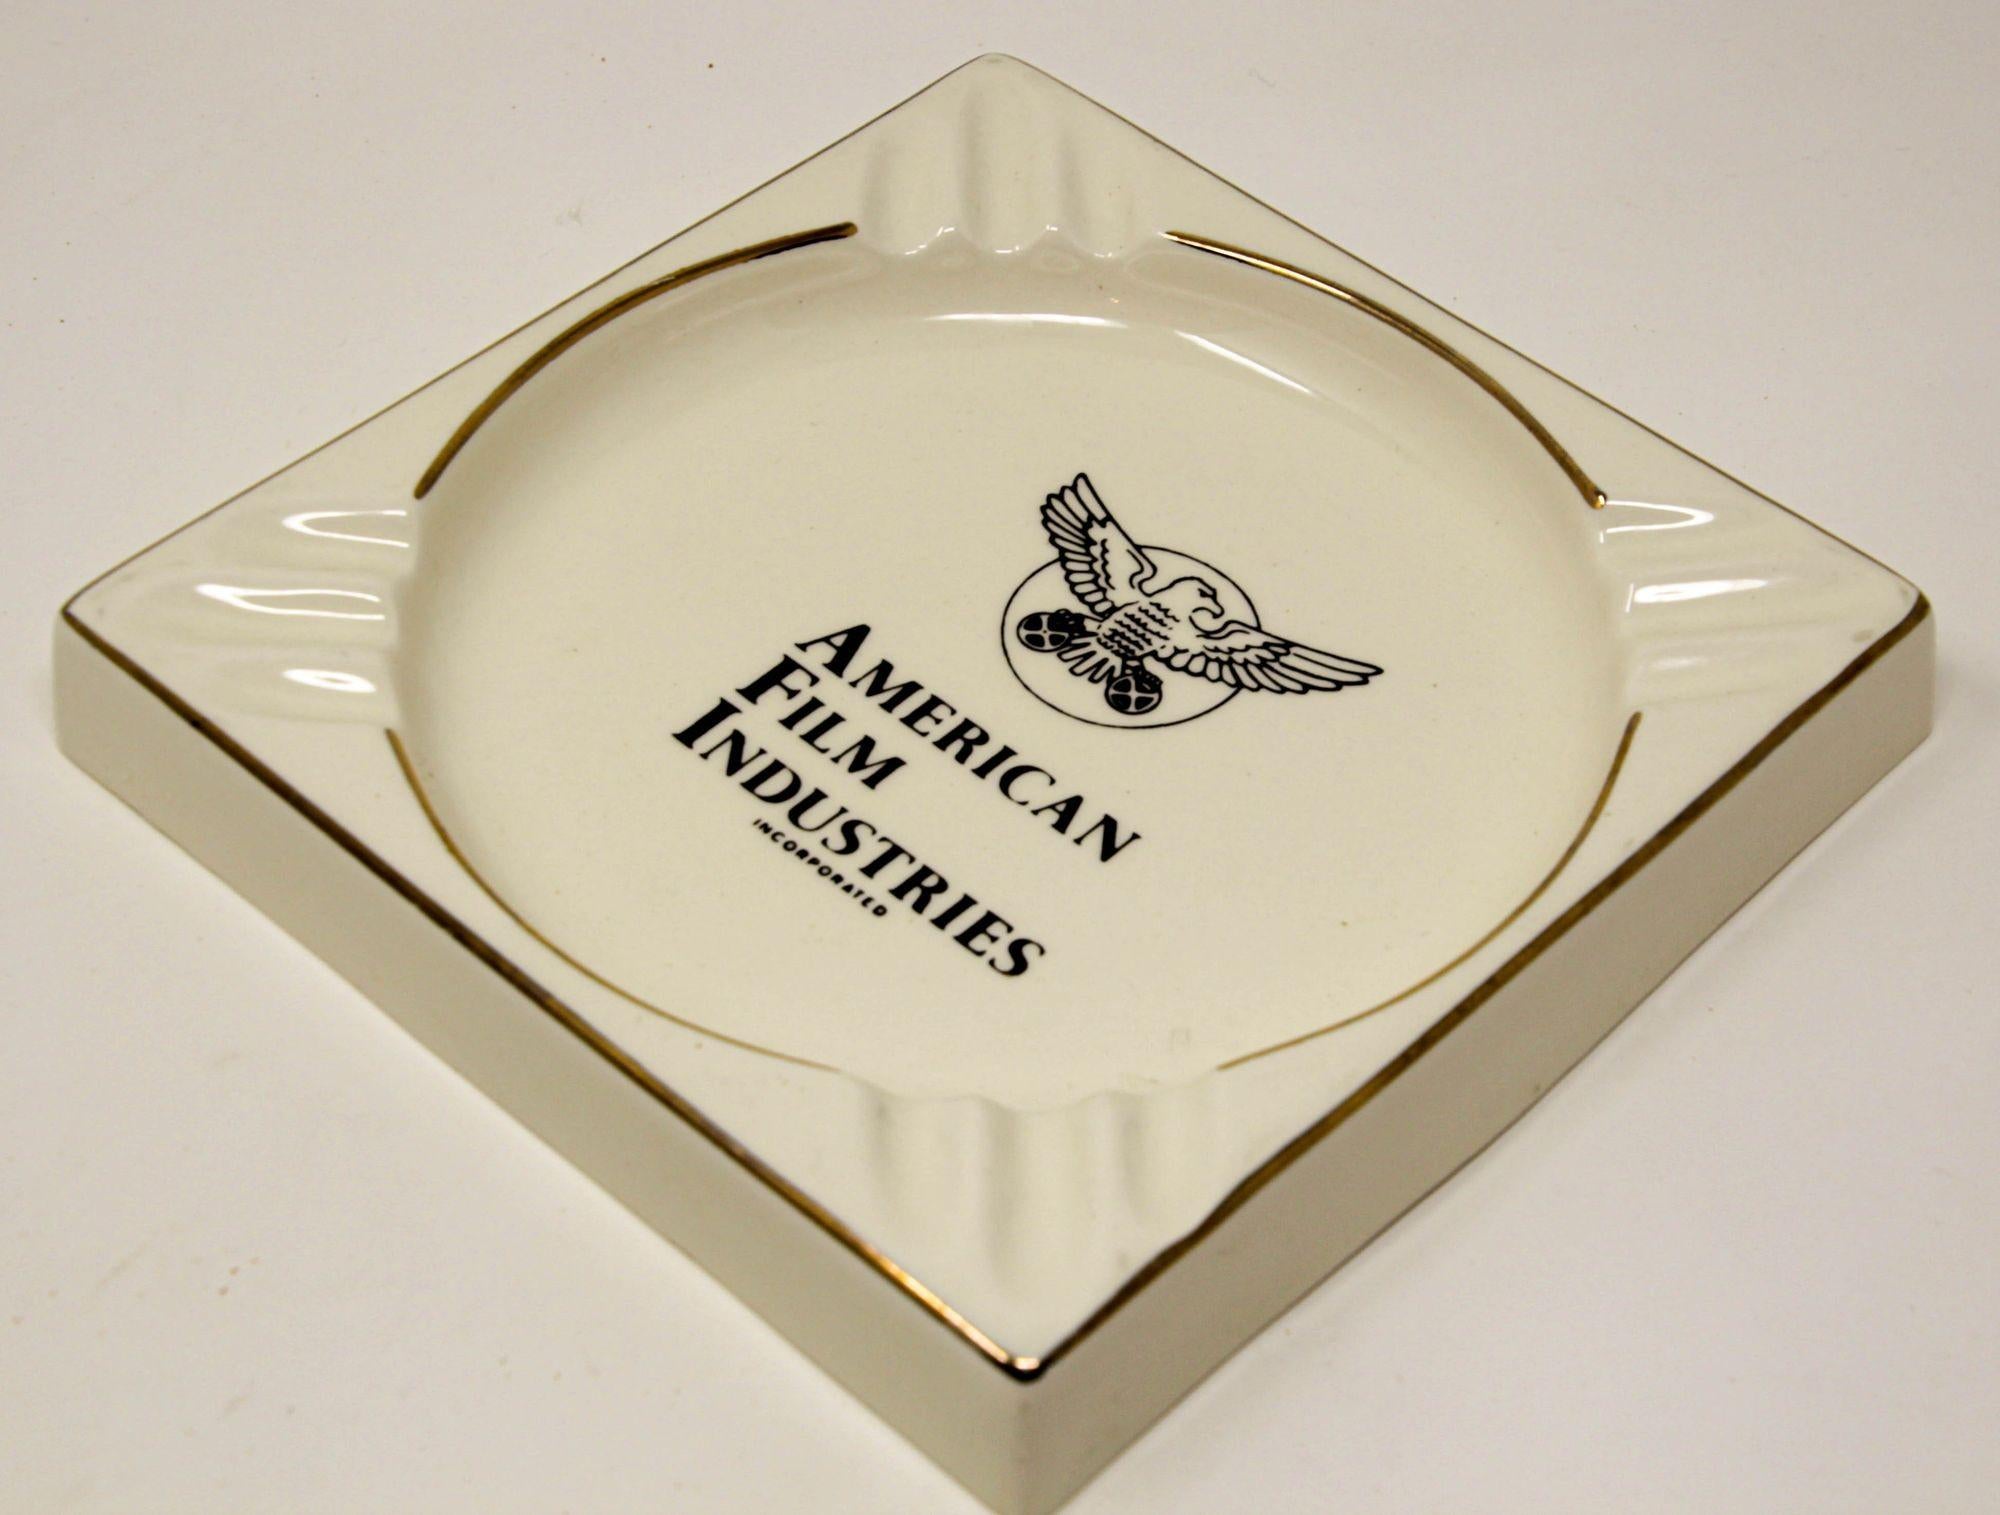 Vintage American Film Industries Incorporated Large Ceramic Ashtray In Good Condition For Sale In North Hollywood, CA